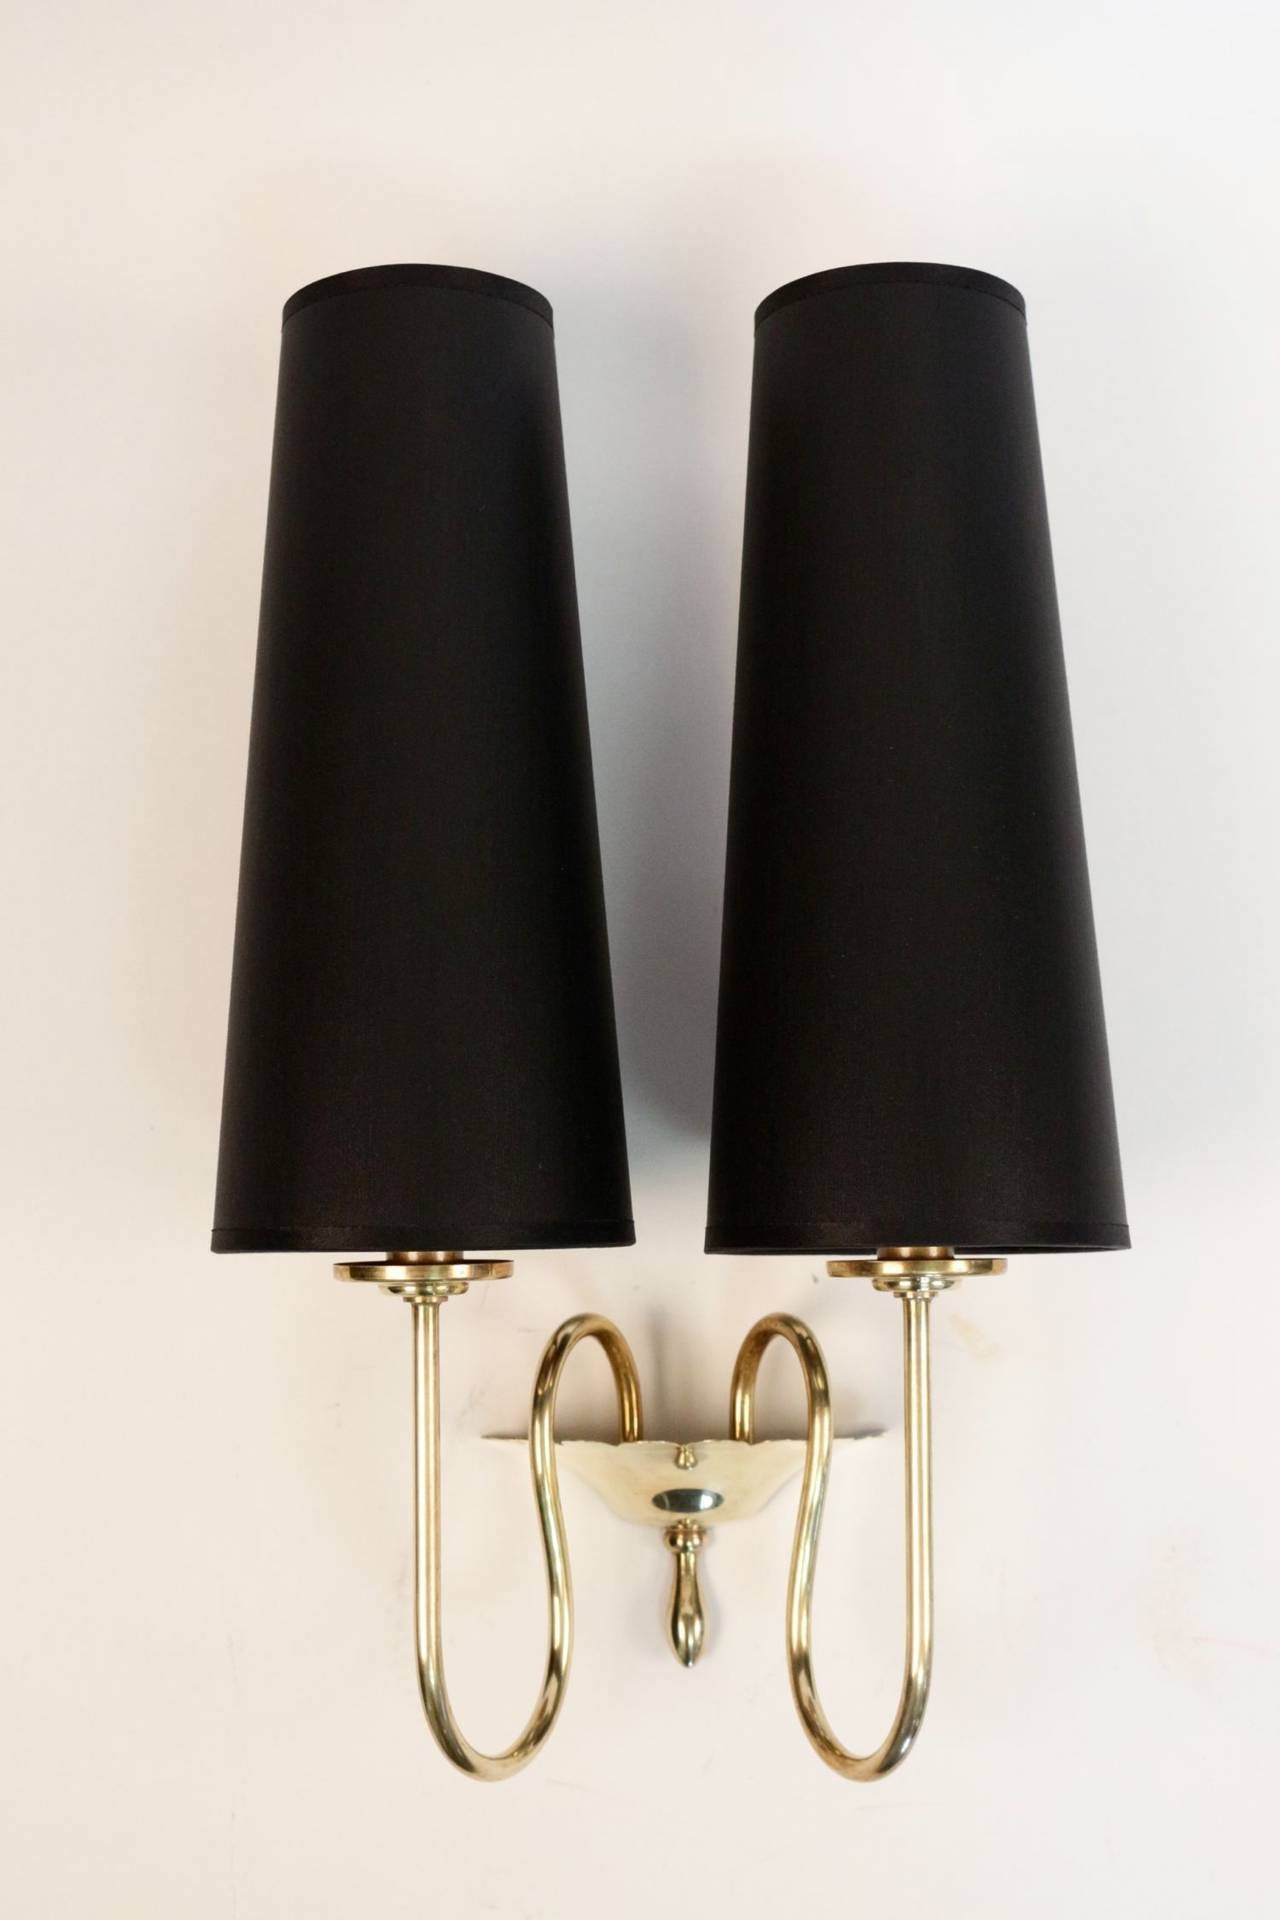 Mid-20th Century Pair of Neoclassical Sconces by Maison Arlus